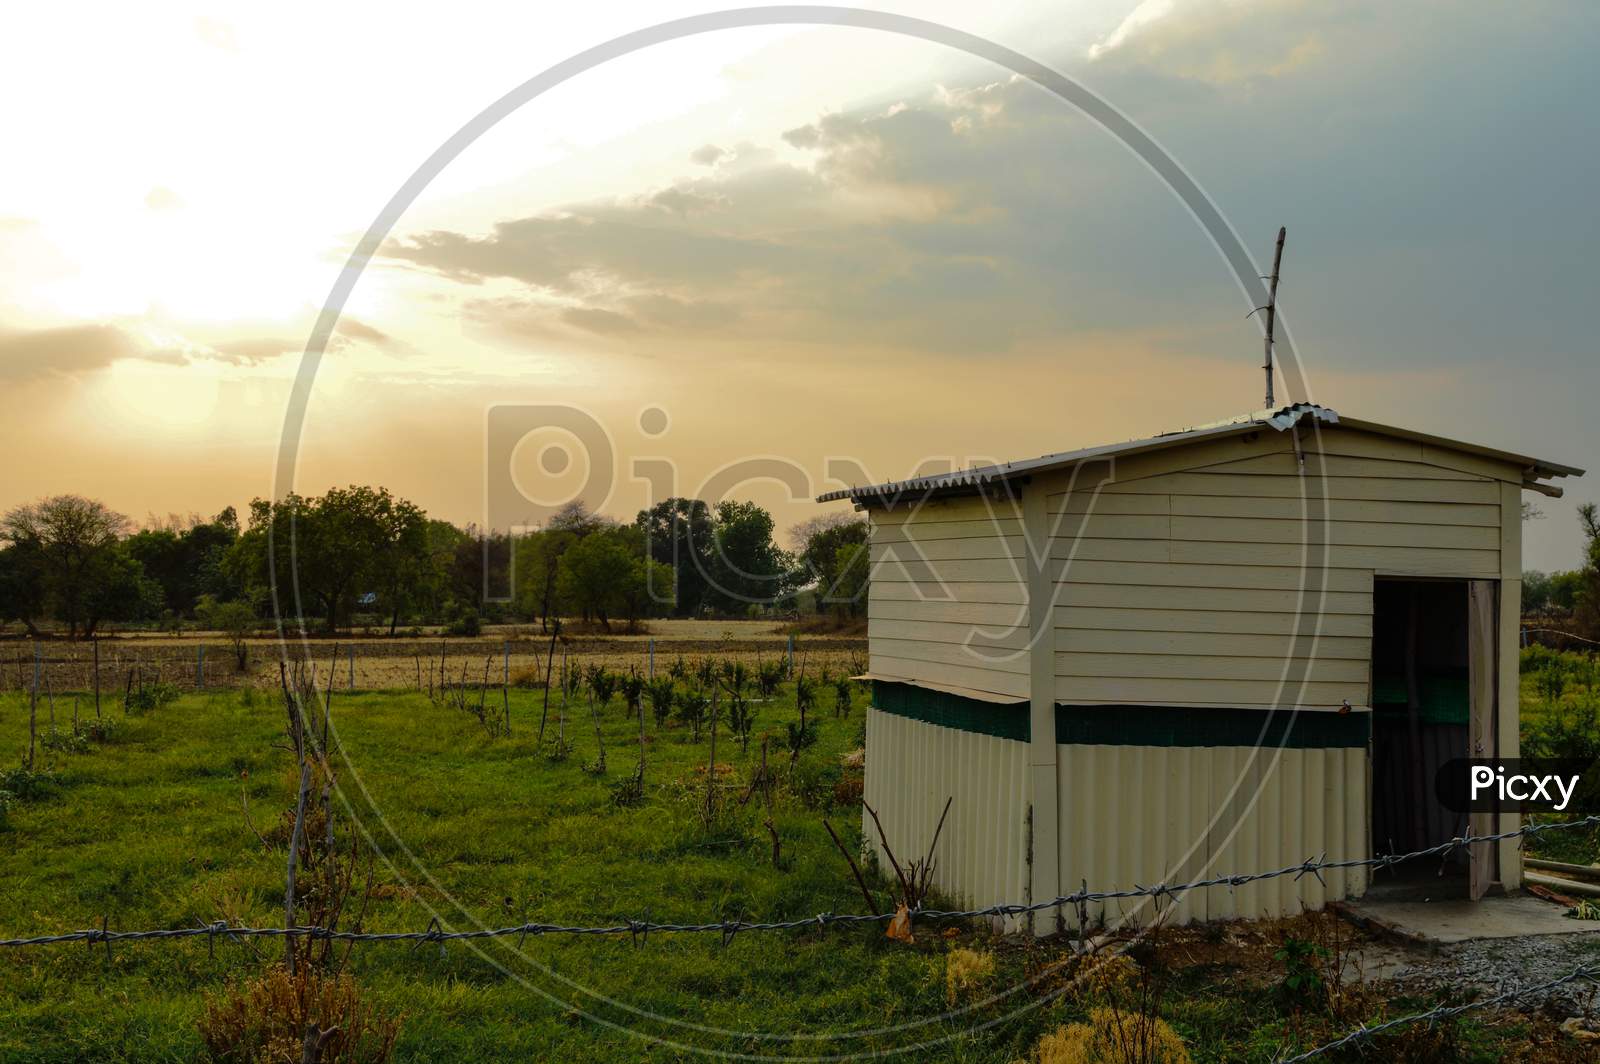 A Beautiful Landscape Evening View Of Hut And Field Of Pomegranate And Apple Plumb At Indian Village.